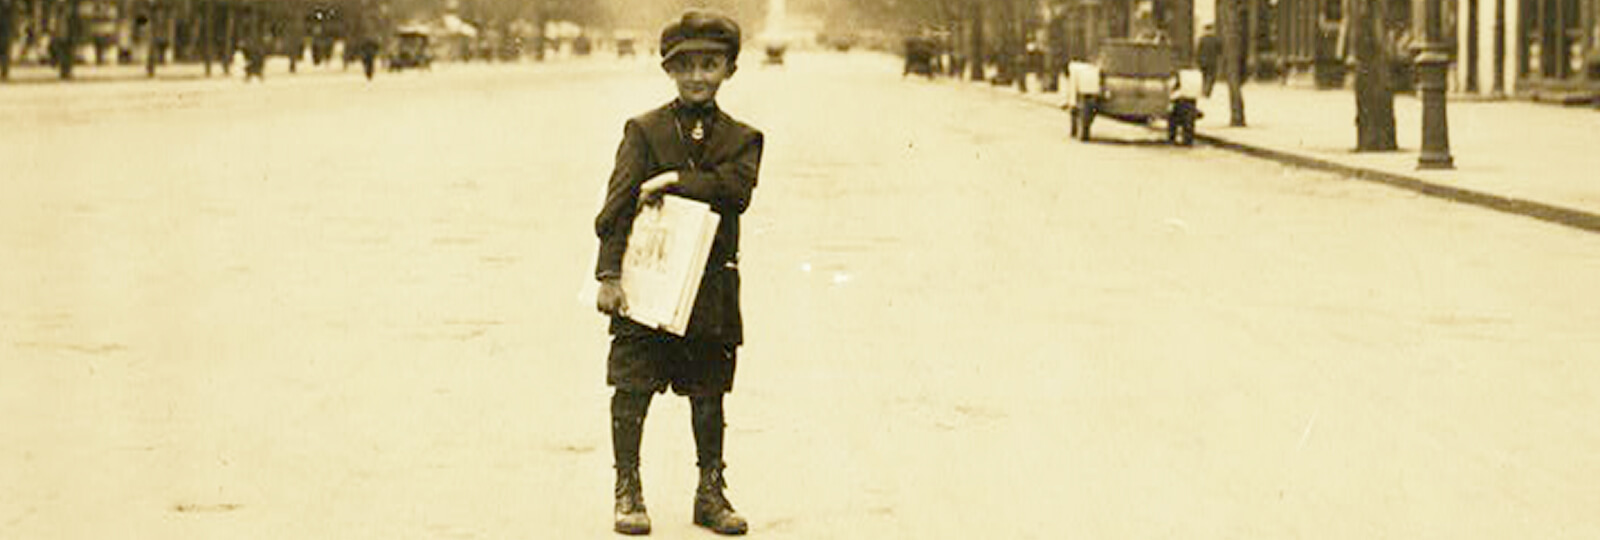 A photo from the early 20th century of a newsboy holding newspapers